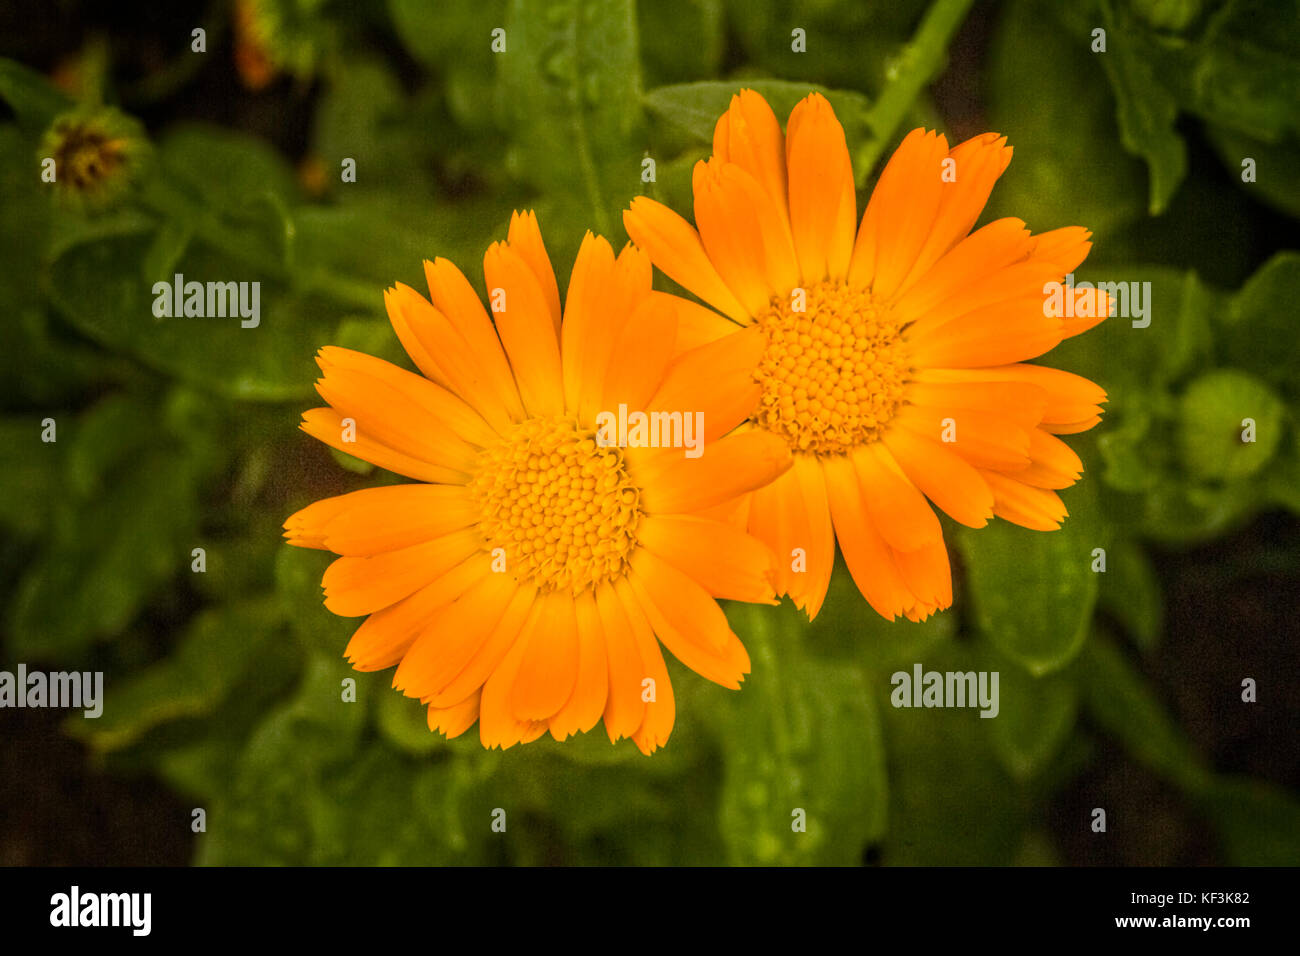 Marigold or calendula flower, an edible plant also used in industry. Stock Photo